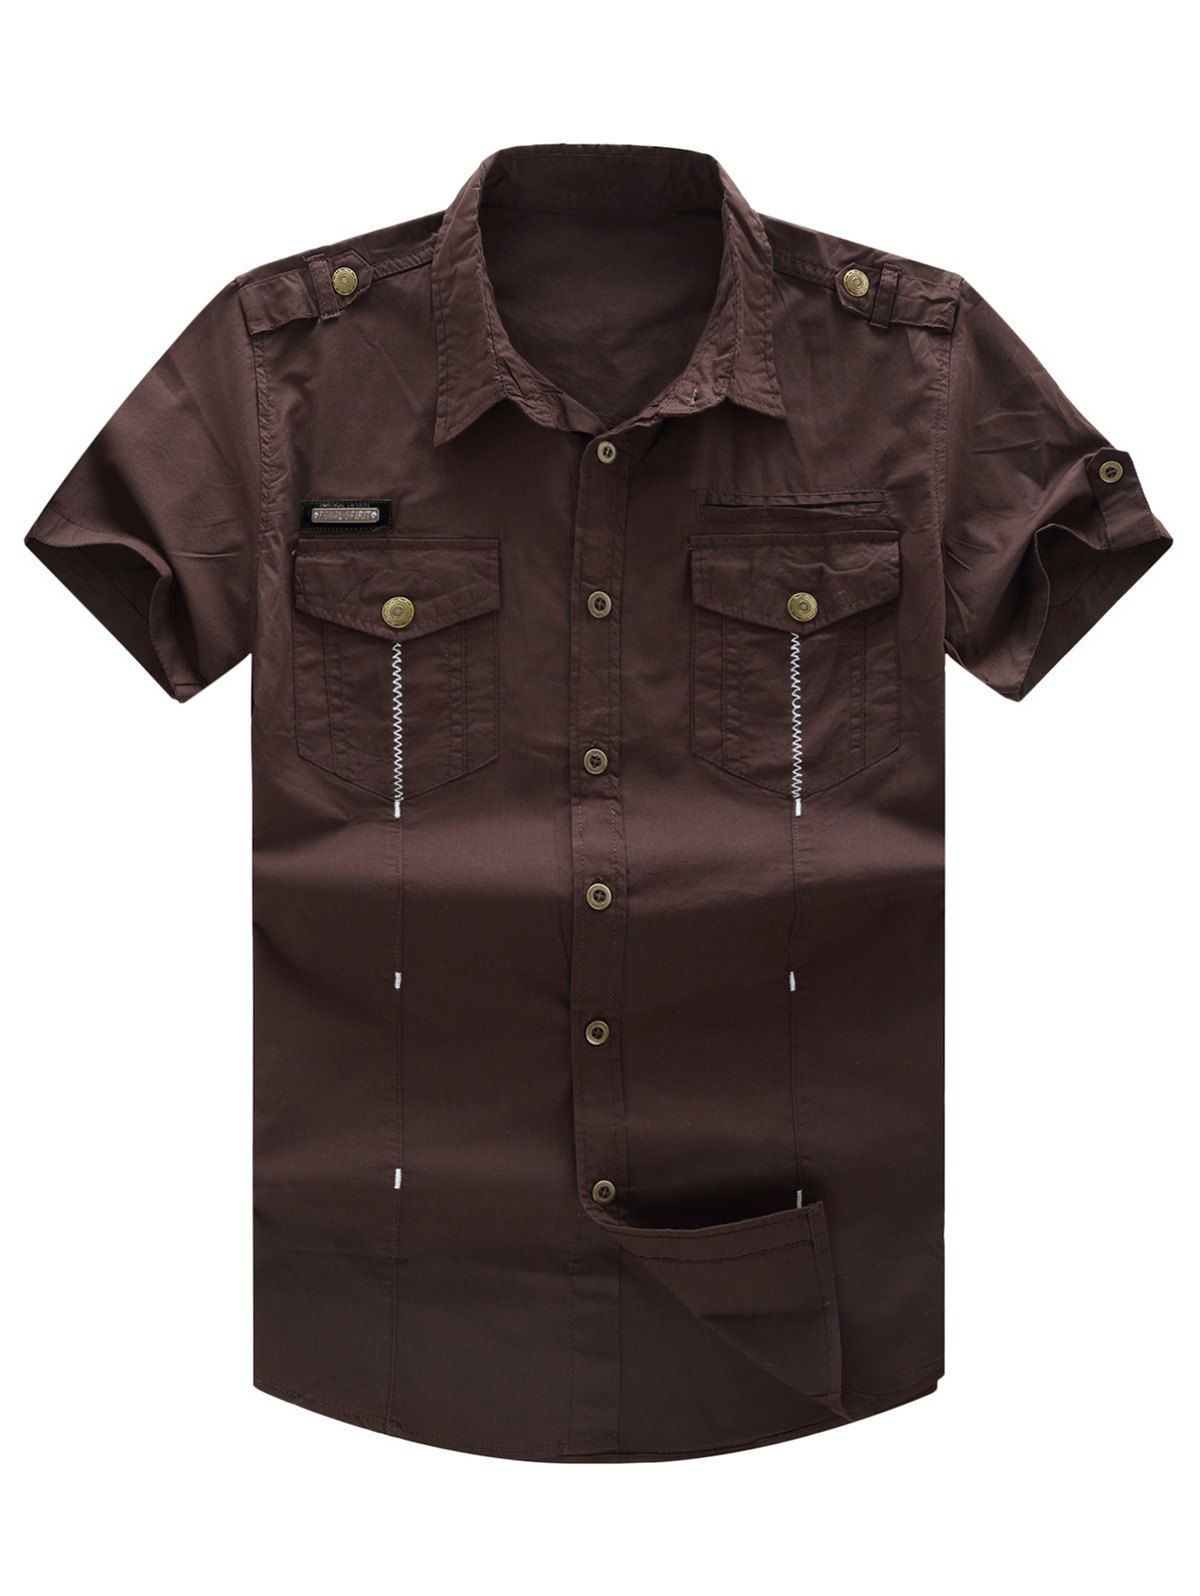 [41% OFF] 2021 Short Sleeve Pocket Military Shirt With Epaulet In BROWN ...